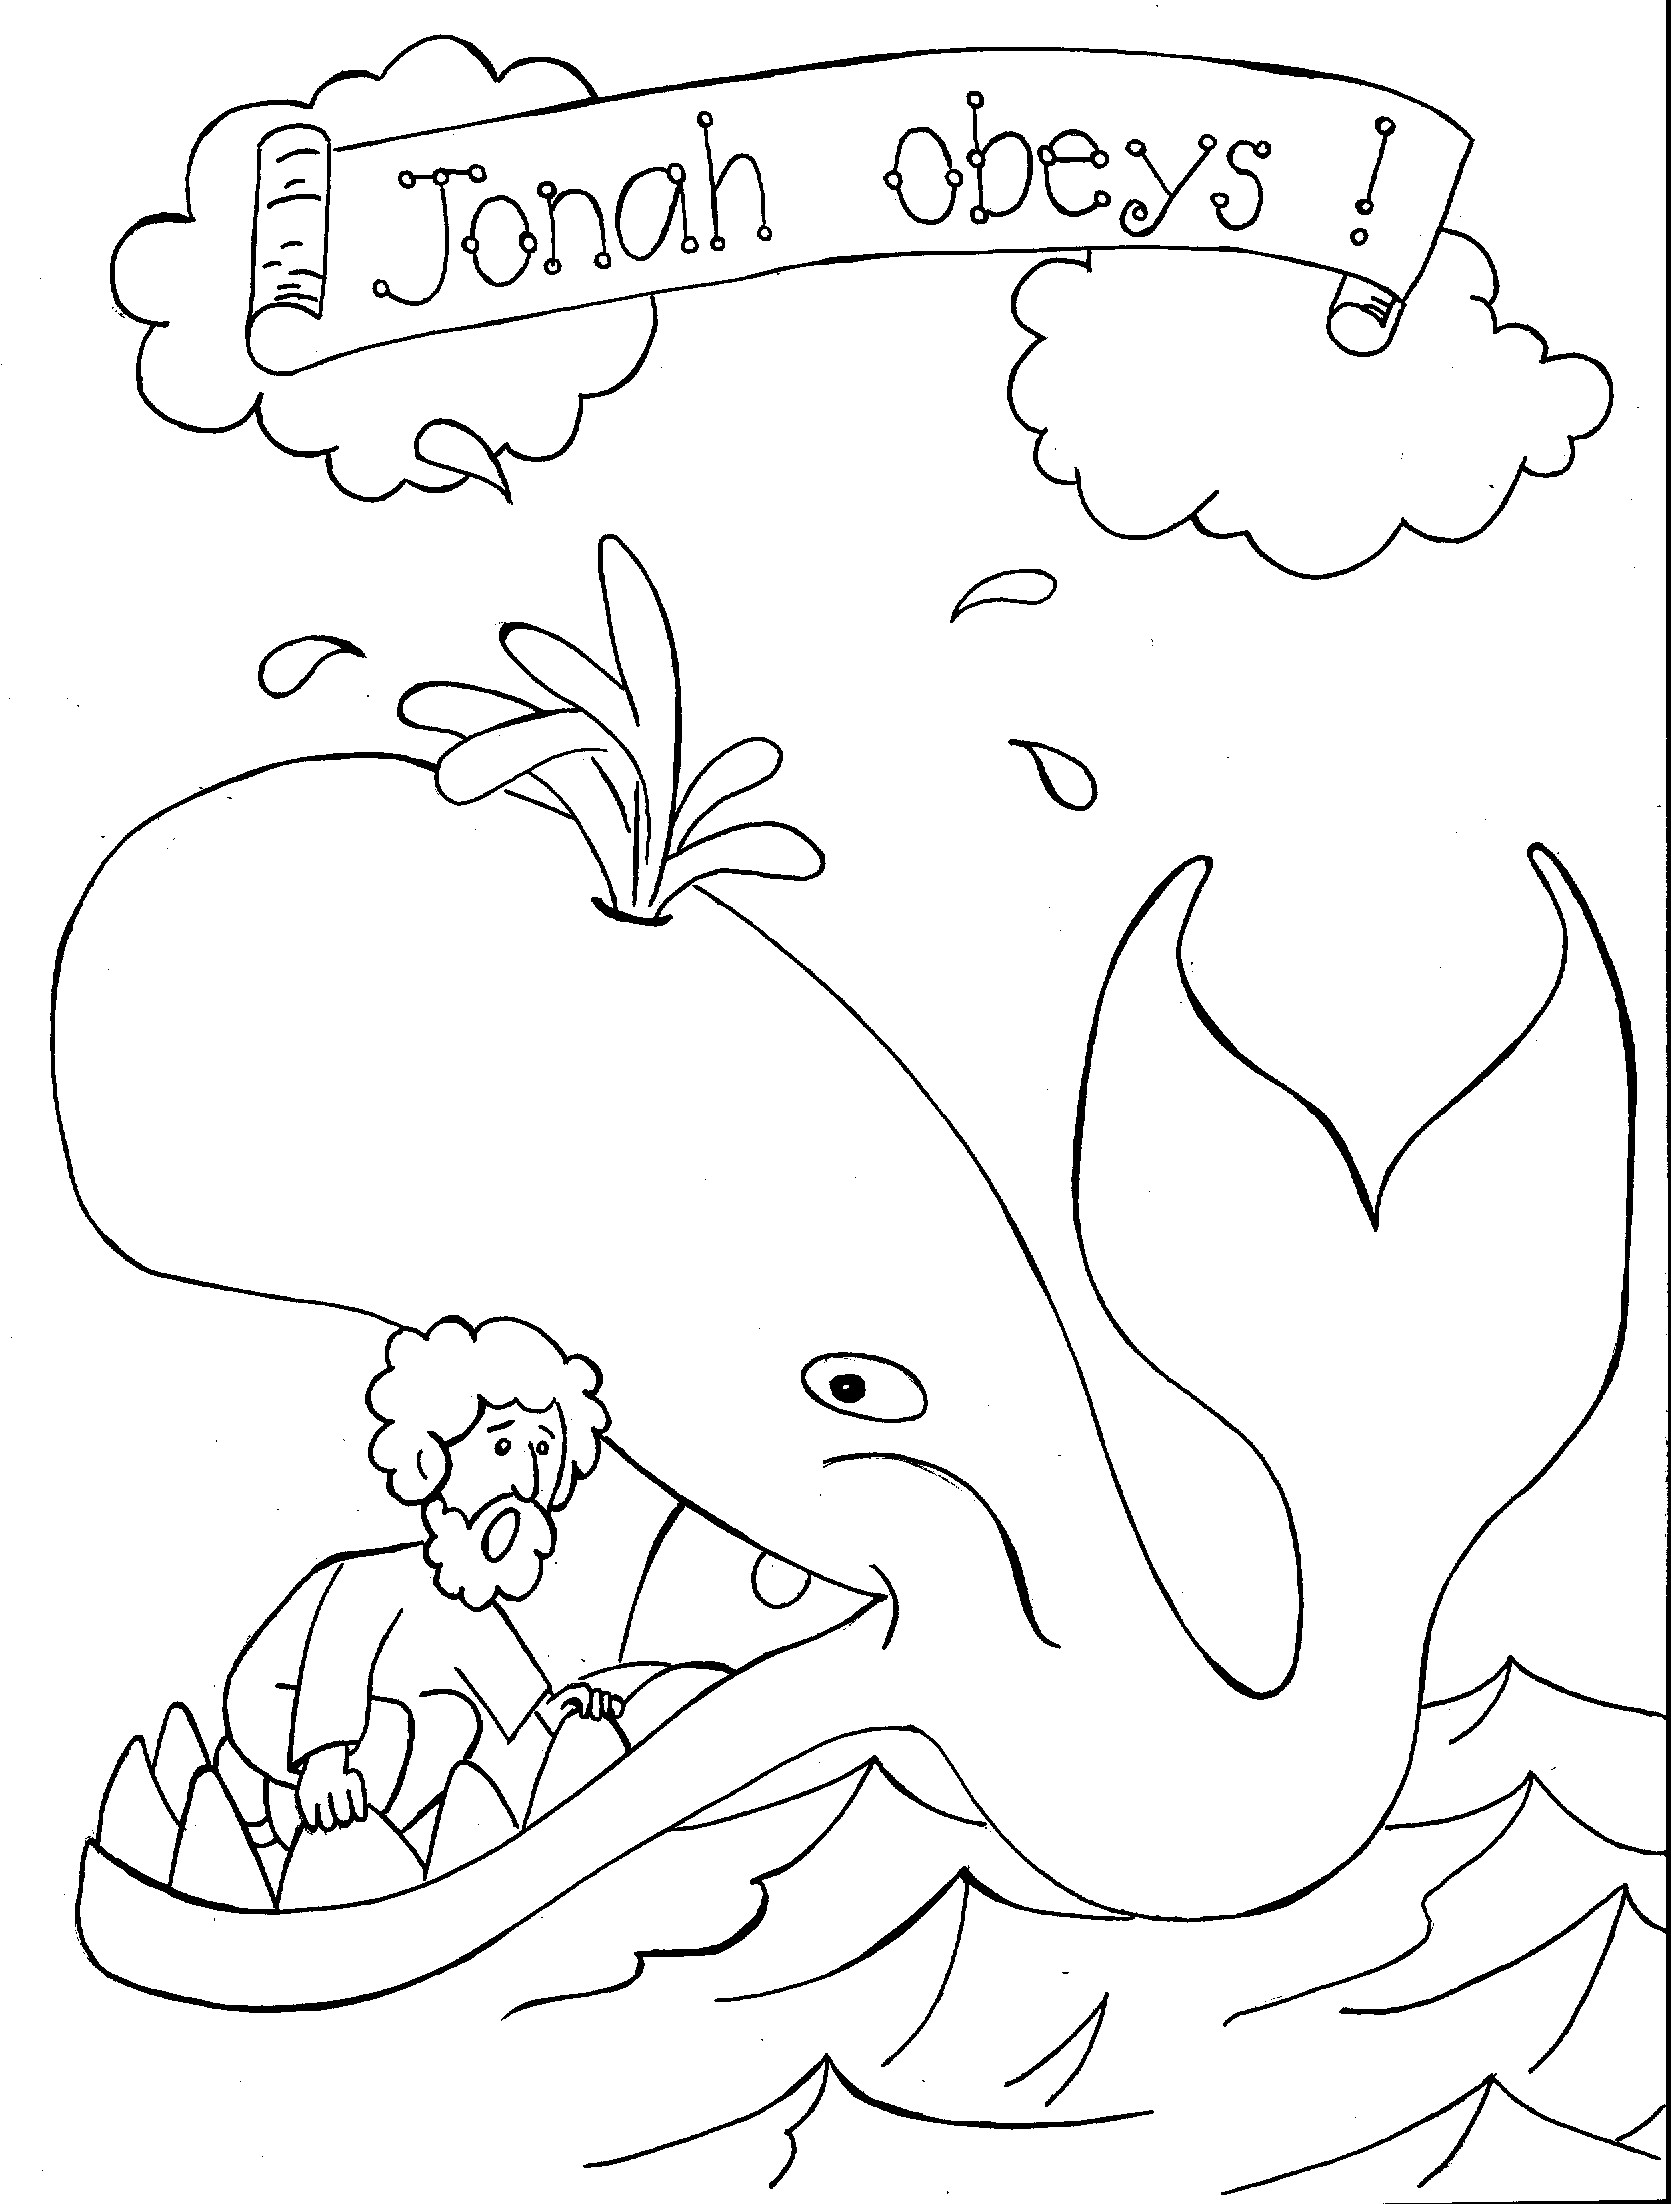 Children Bible Stories Coloring Pages
 Bible Story Coloring Pages Are Coloring Pages To Use With